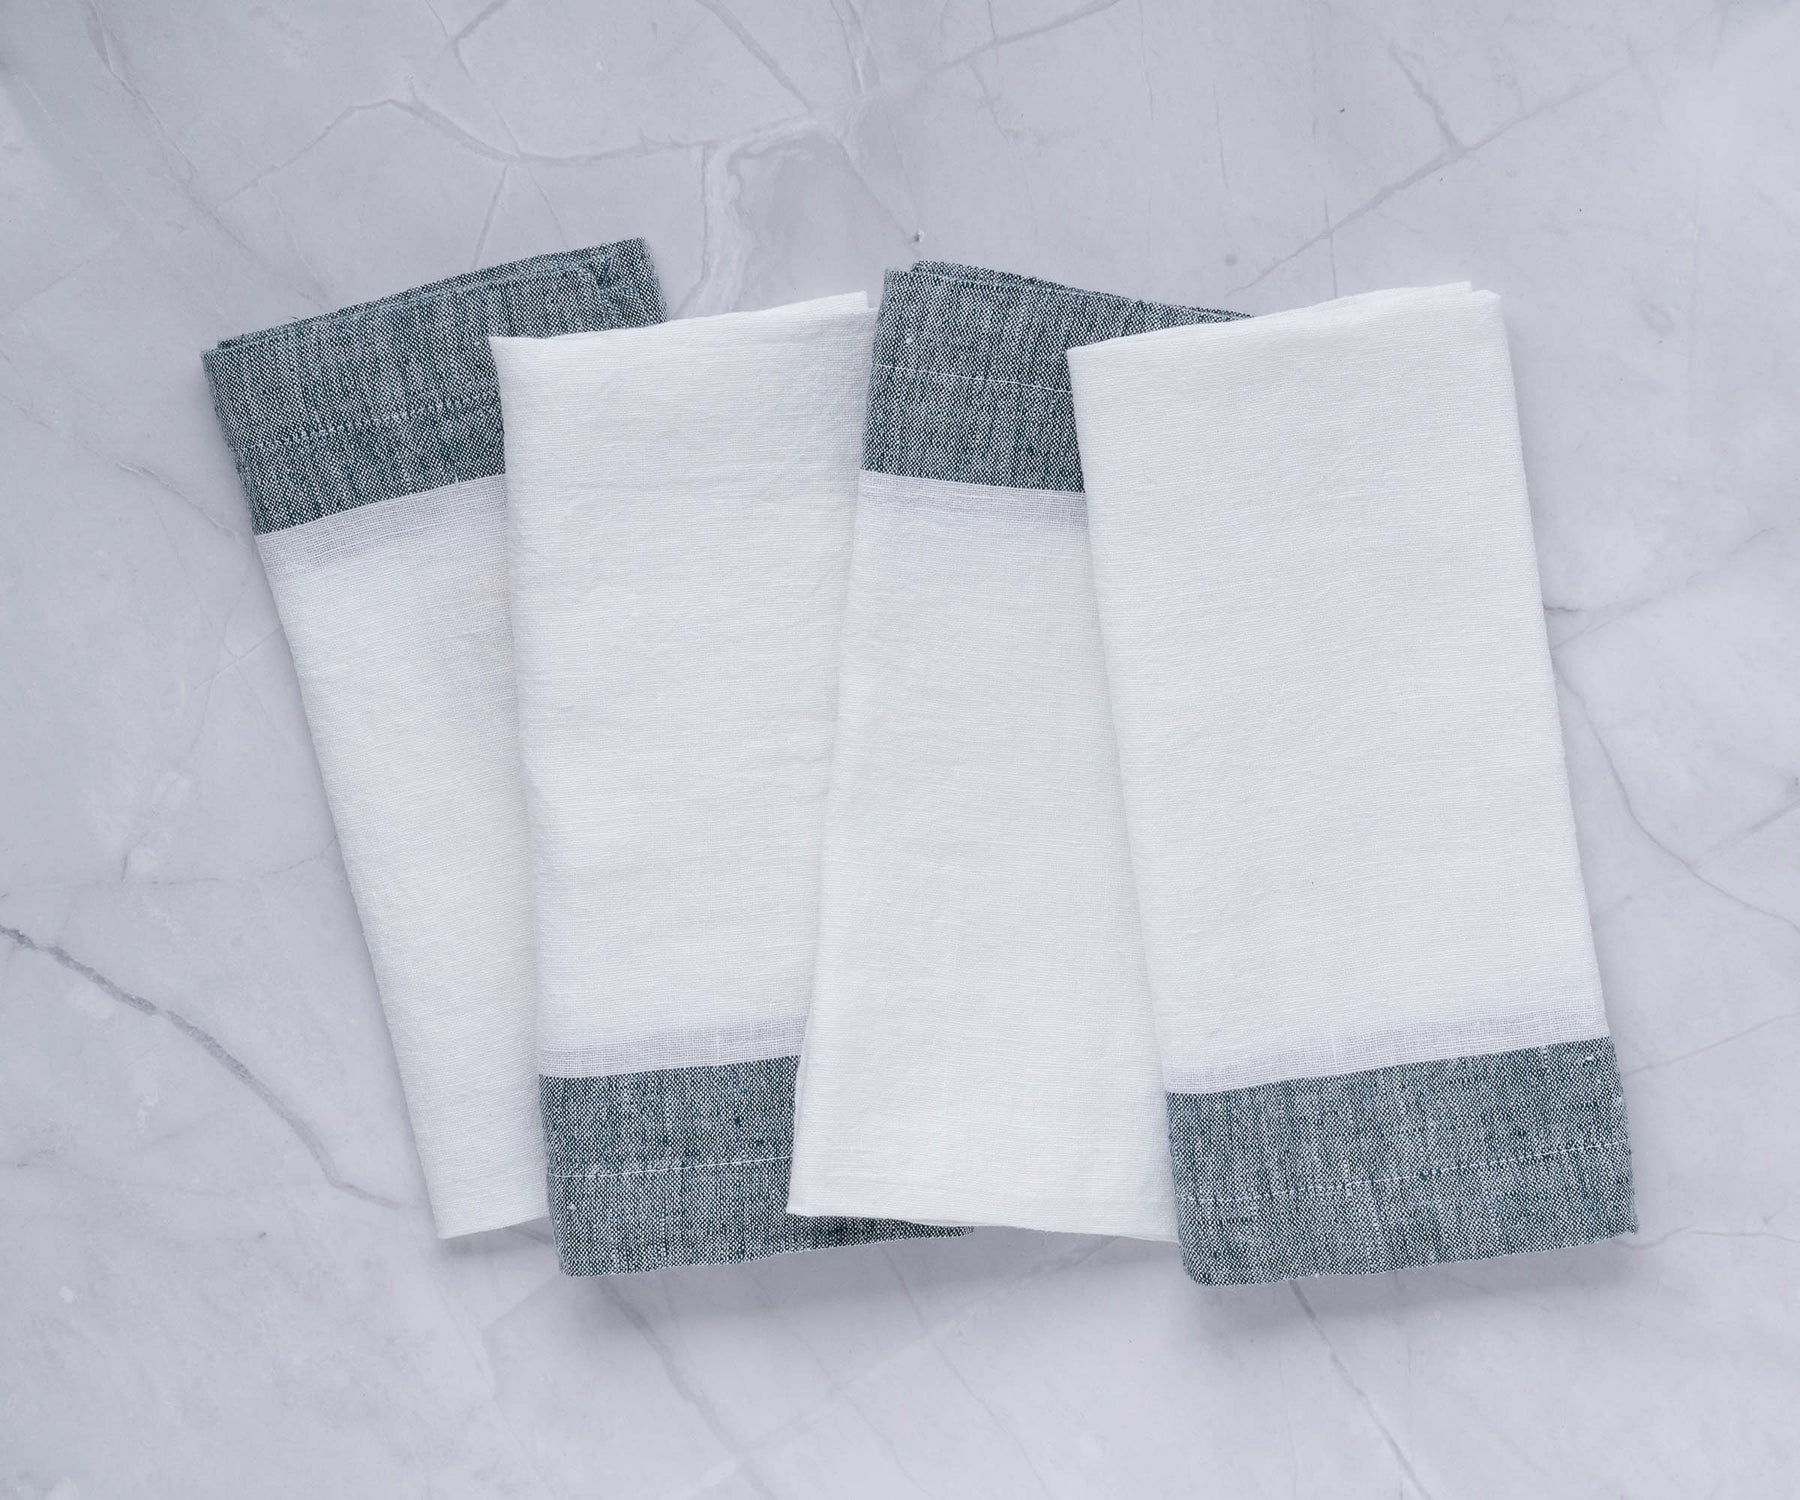 Linen-like napkins, offering the look and feel of linen with the convenience of disposable napkins.